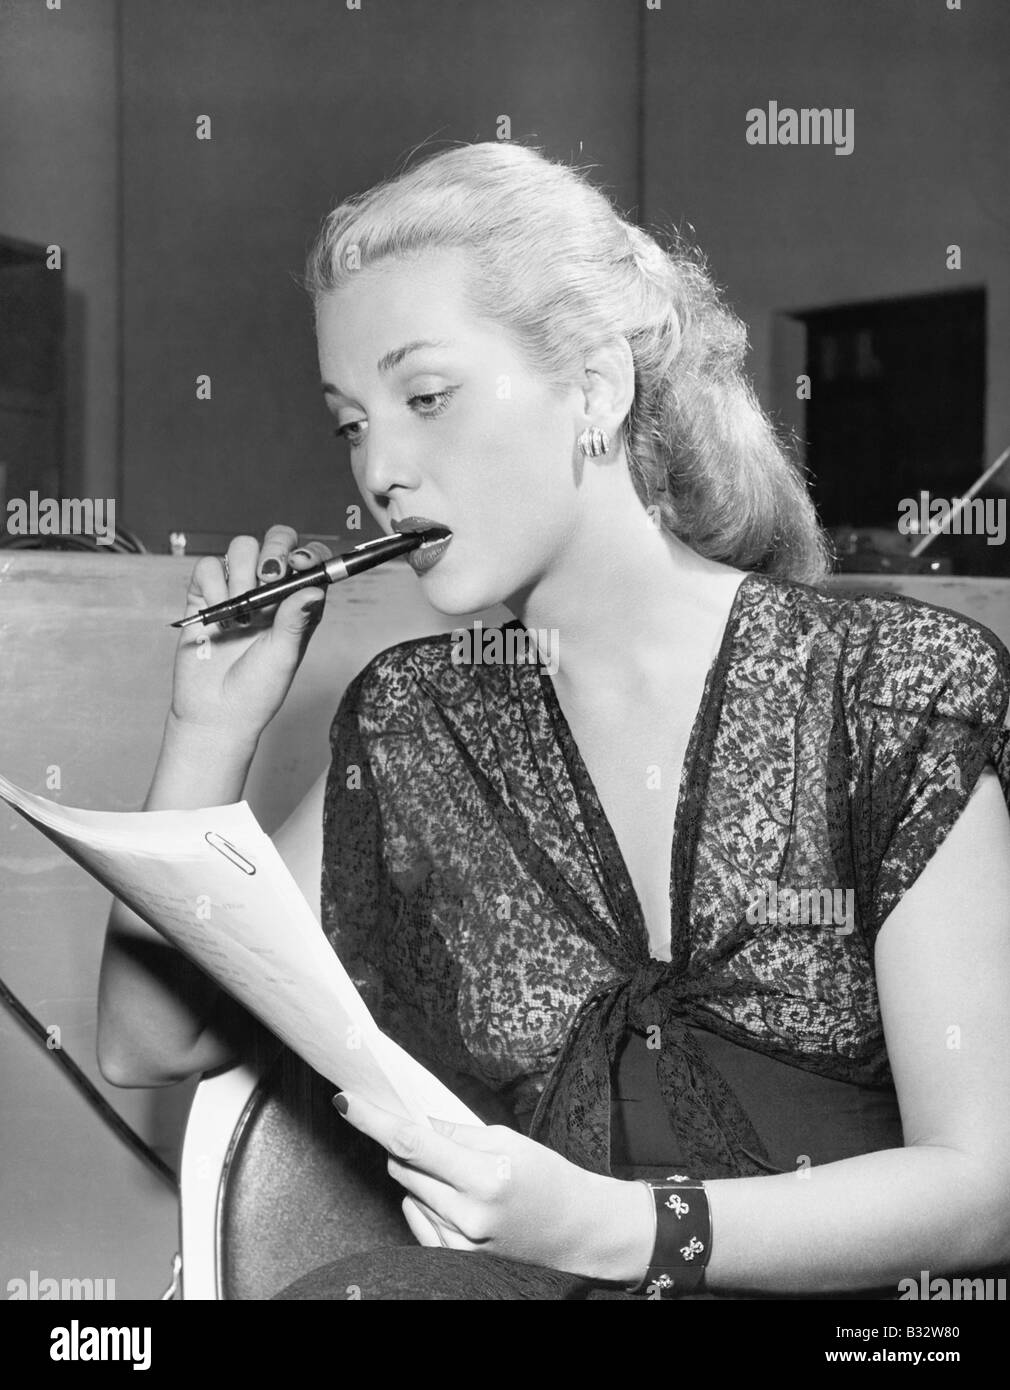 Young woman with pen in mouth, reading a letter Stock Photo